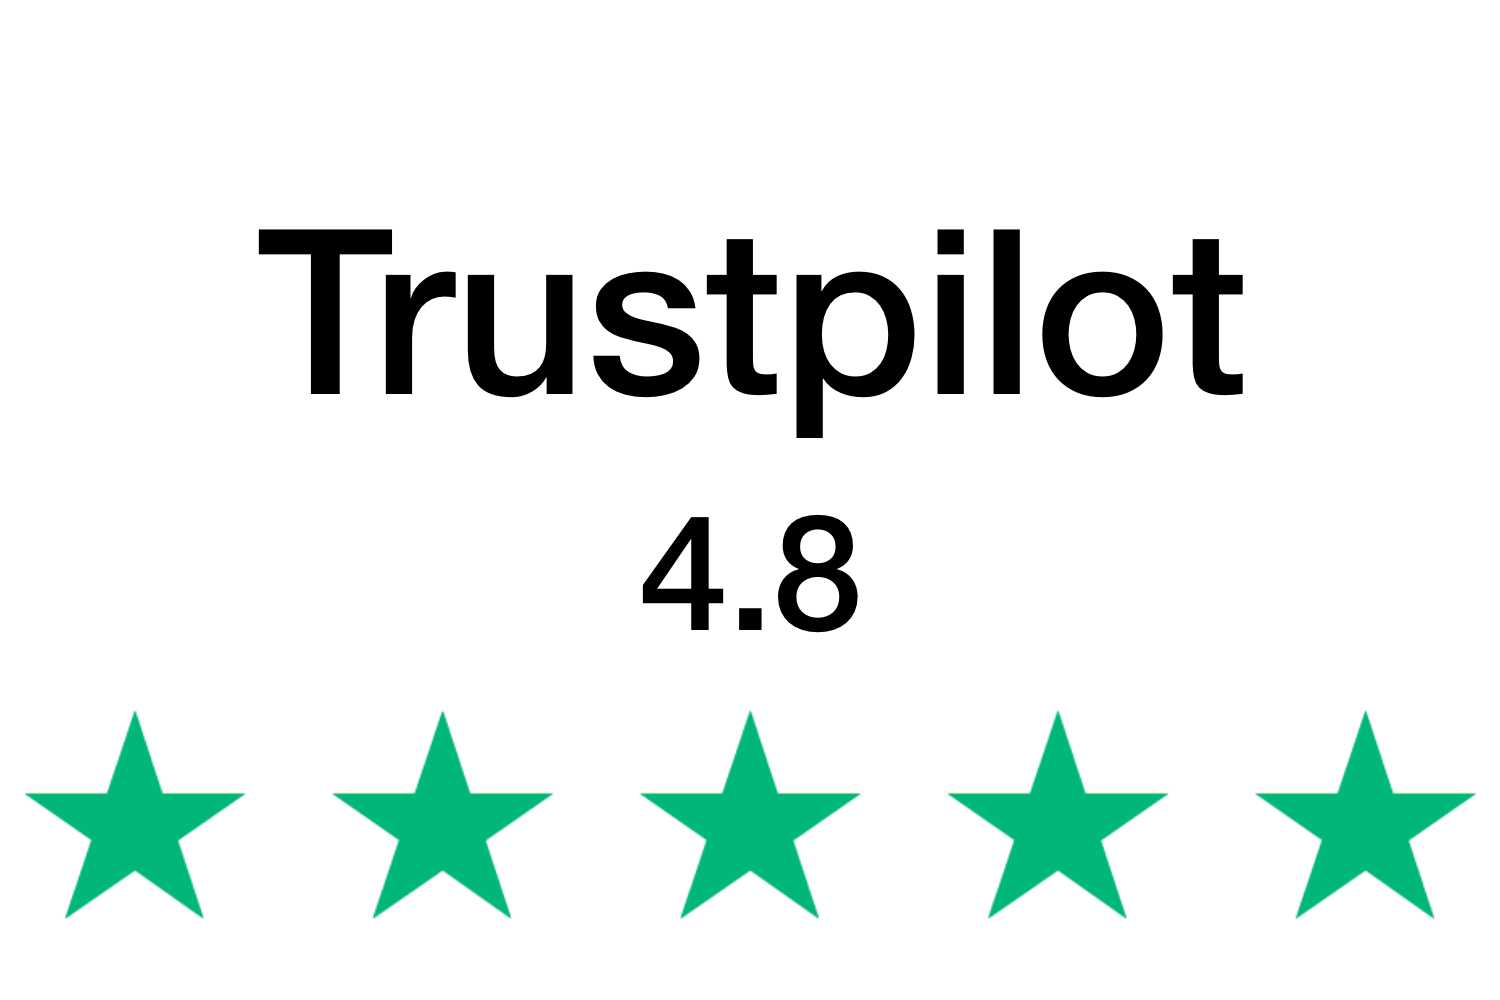 New Trustpilot Graphic with rating